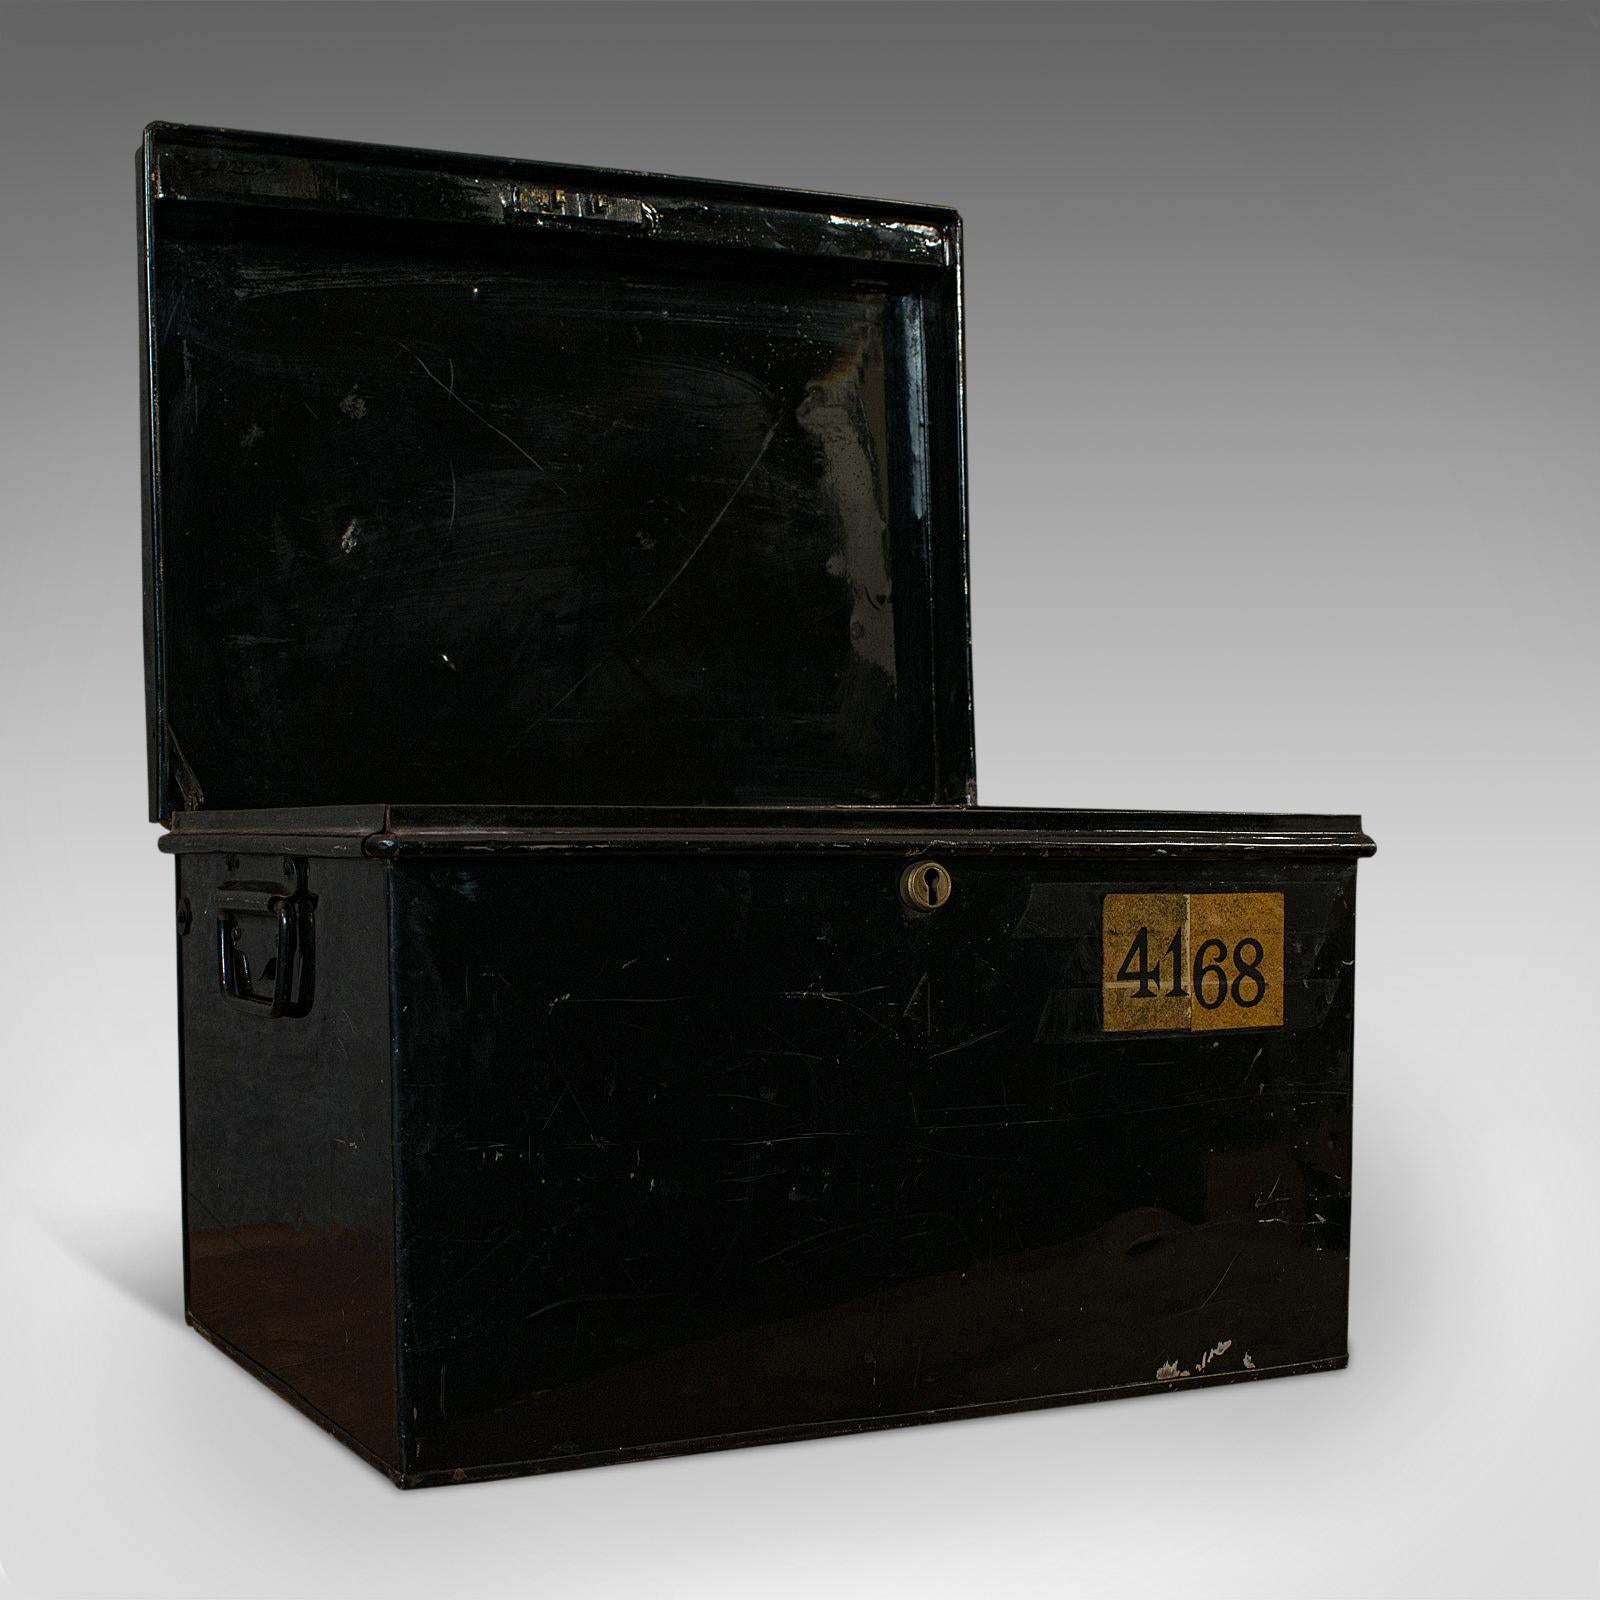 This is a vintage deposit box. An English, metal document chest, dating to the mid-20th century, circa 1940.

Charming vintage storage
Displaying a desirable aged patina
Black painted metal shows wear commensurate with age

Small, working